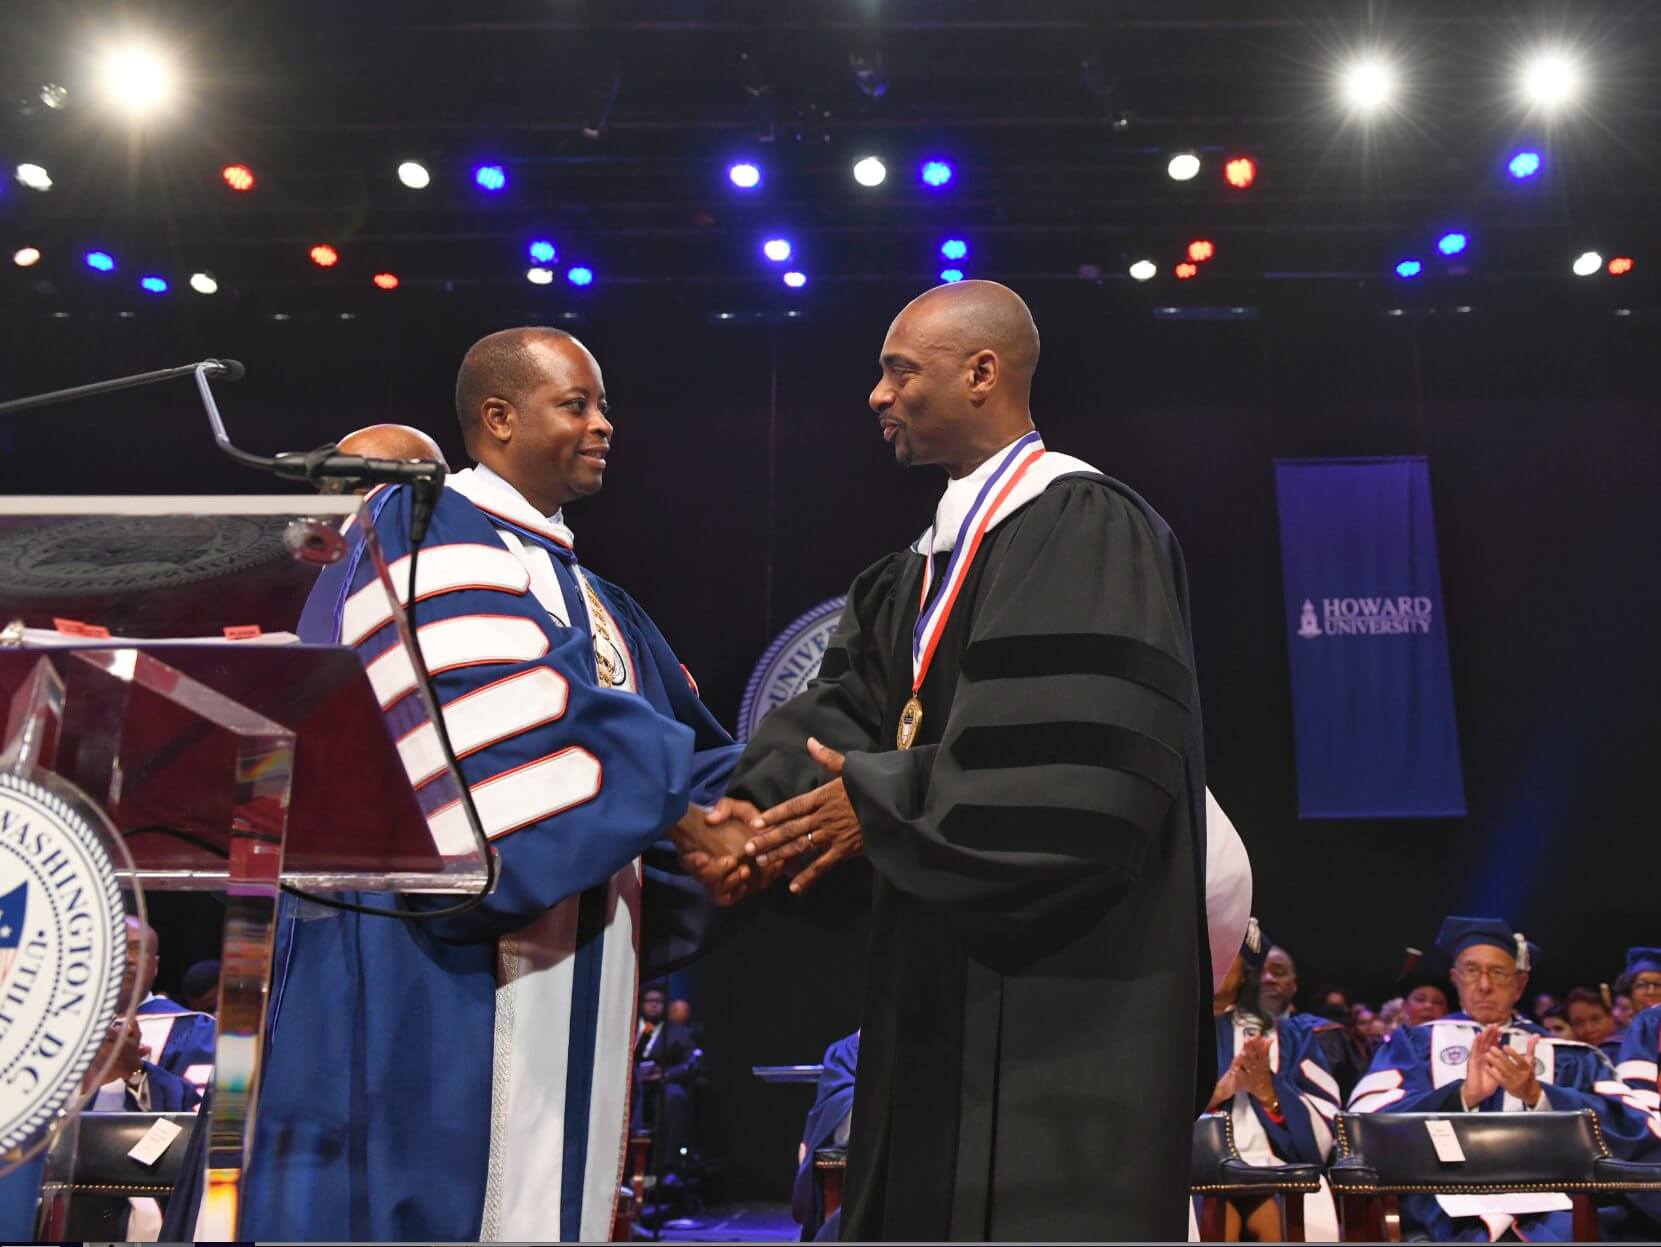 Howard Students Called To Follow Their Dreams At Convocation